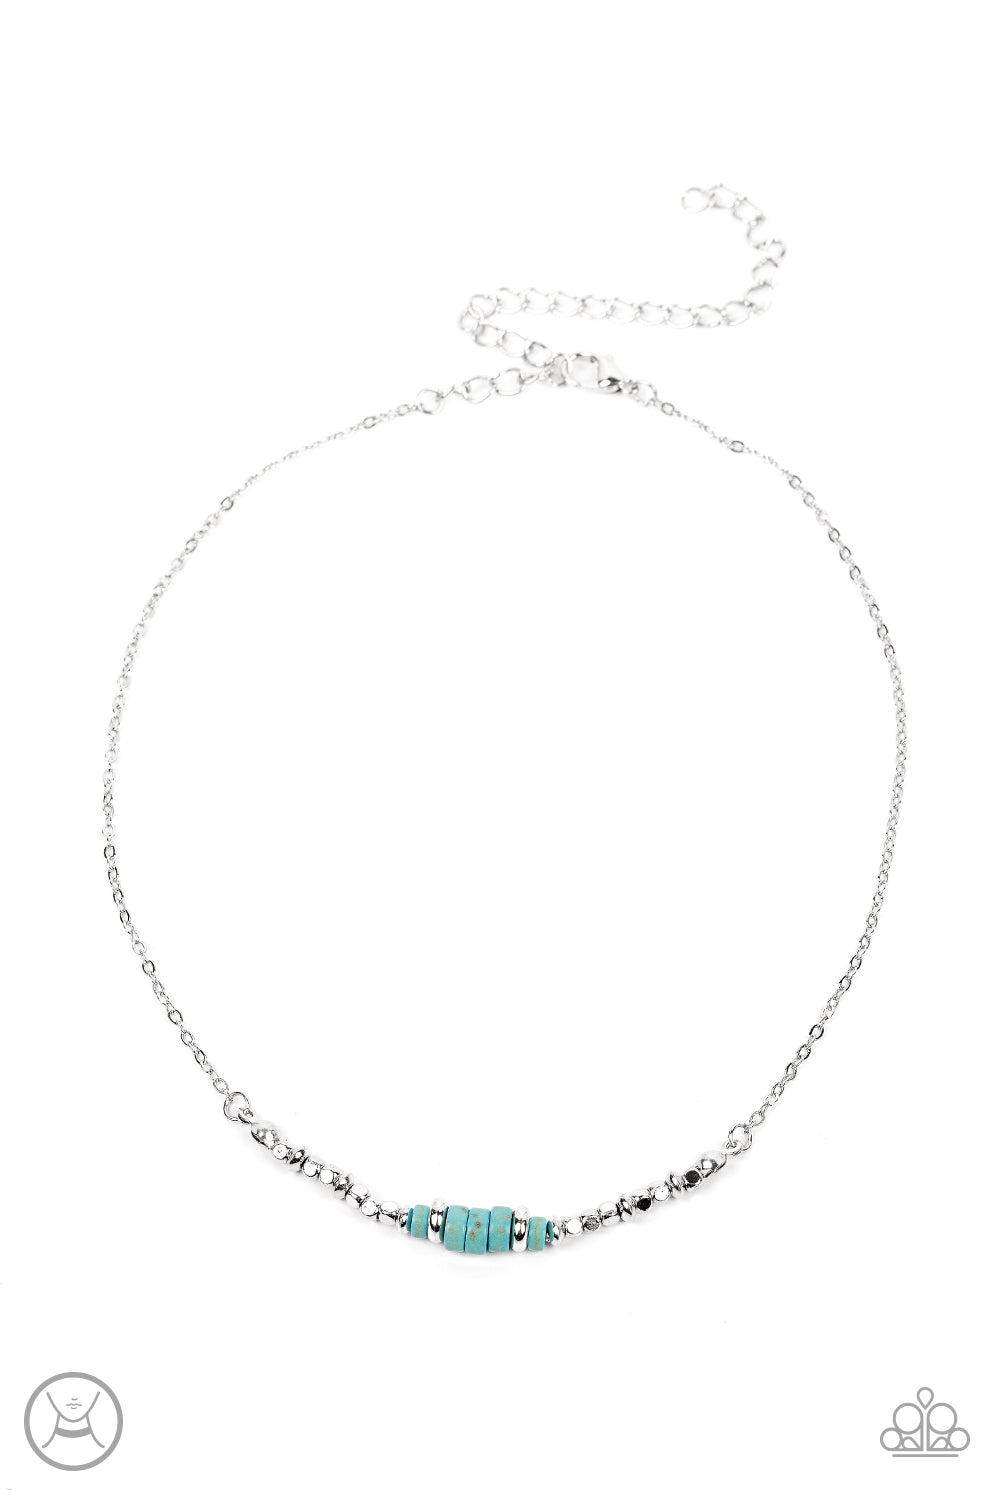 Retro Rejuvenation Blue Choker Necklace - Paparazzi Accessories  A trio of earthy turquoise stone discs is flanked by square silver beads threaded along a dainty silver chain, creating a harmonious display. Features an adjustable clasp closure.  Sold as one individual choker necklace. Includes one pair of matching earrings.